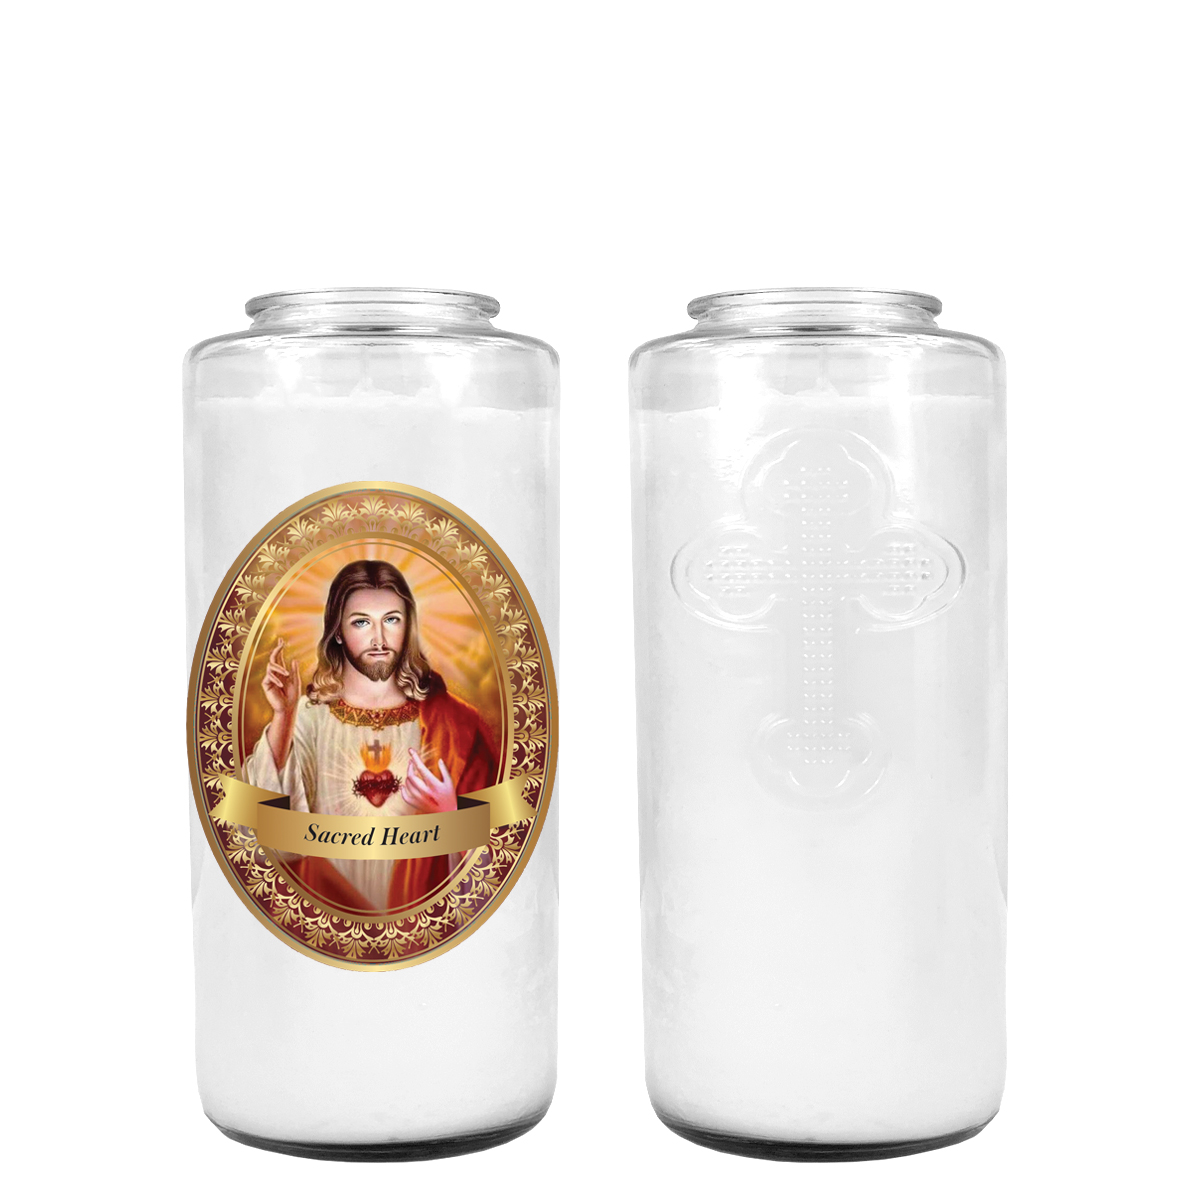 SACRED HEART 3 DAY CANDLE W/ REMOVABLE LABEL